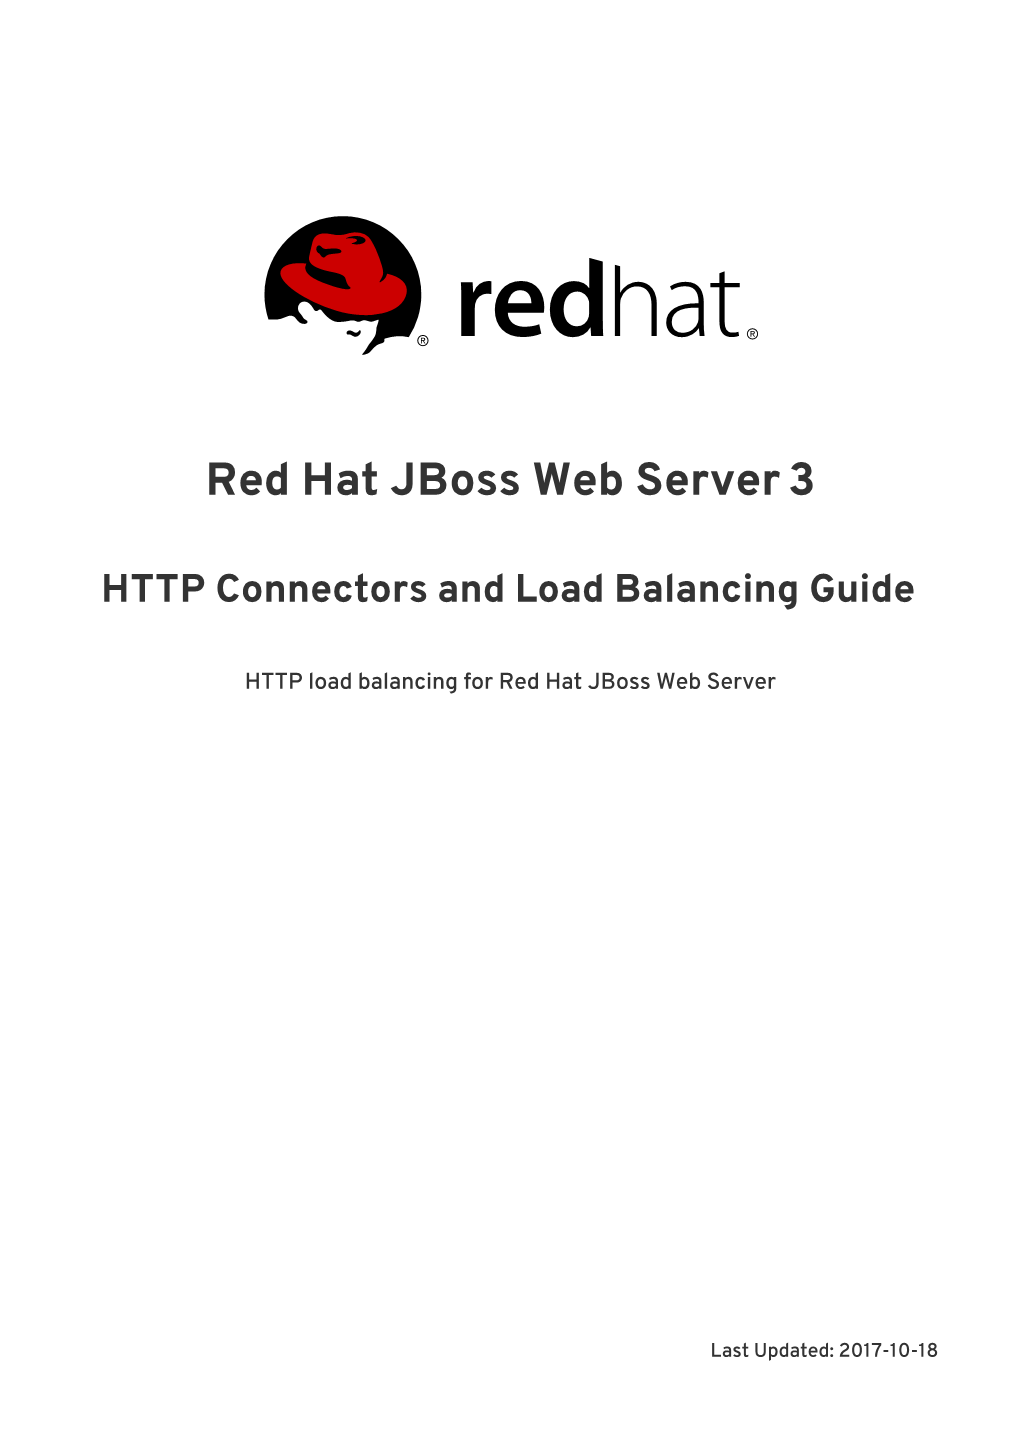 HTTP Connectors and Load Balancing Guide